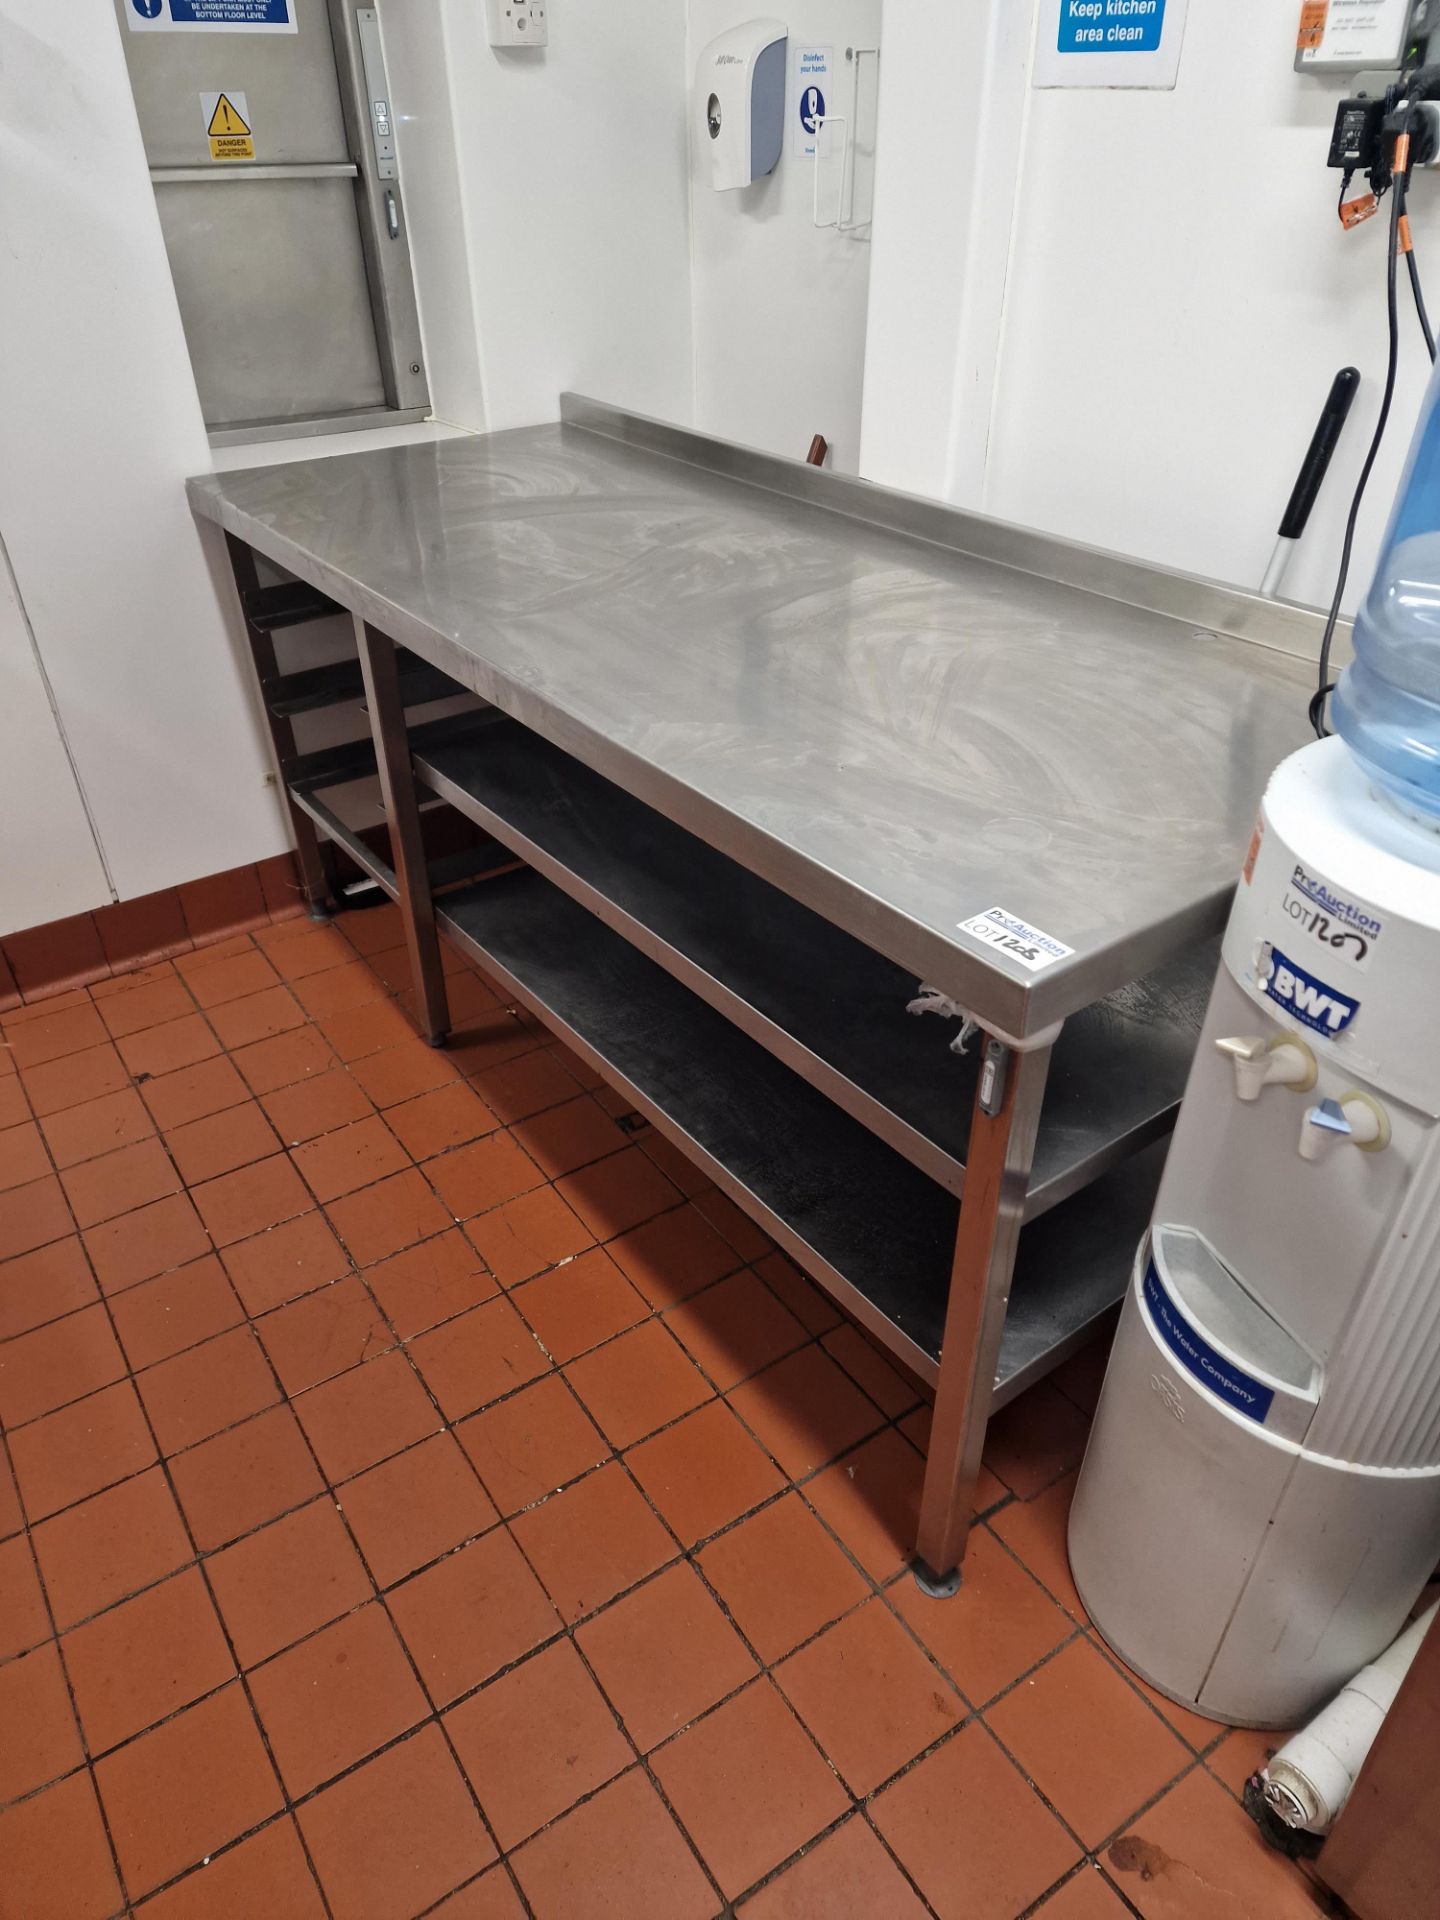 Stainless Steel Preparation Table With Two Shelves And Upstand With Rack Tray Storage 18 5x 75 x